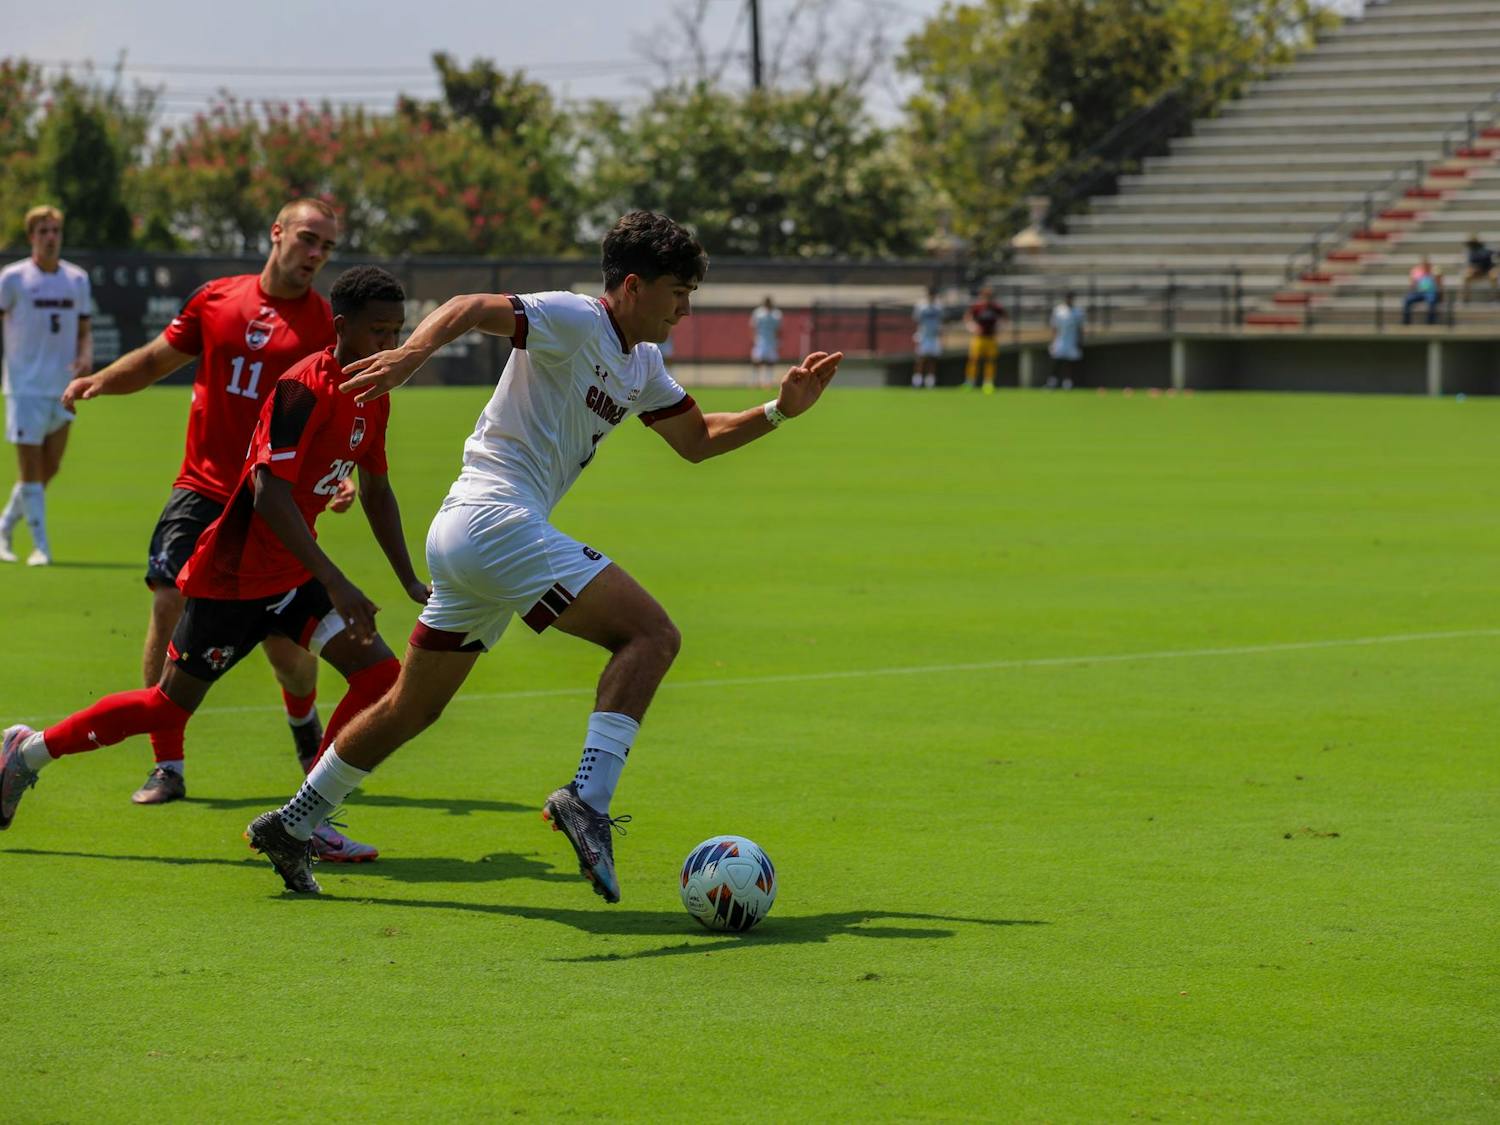 Sophomore midfielder Rocky Perez pushes the ball down the field during the match against Gardner-Webb on Aug. 27, 2023. The Gamecocks totaled 12 shots during the game, but only three shots on goal.